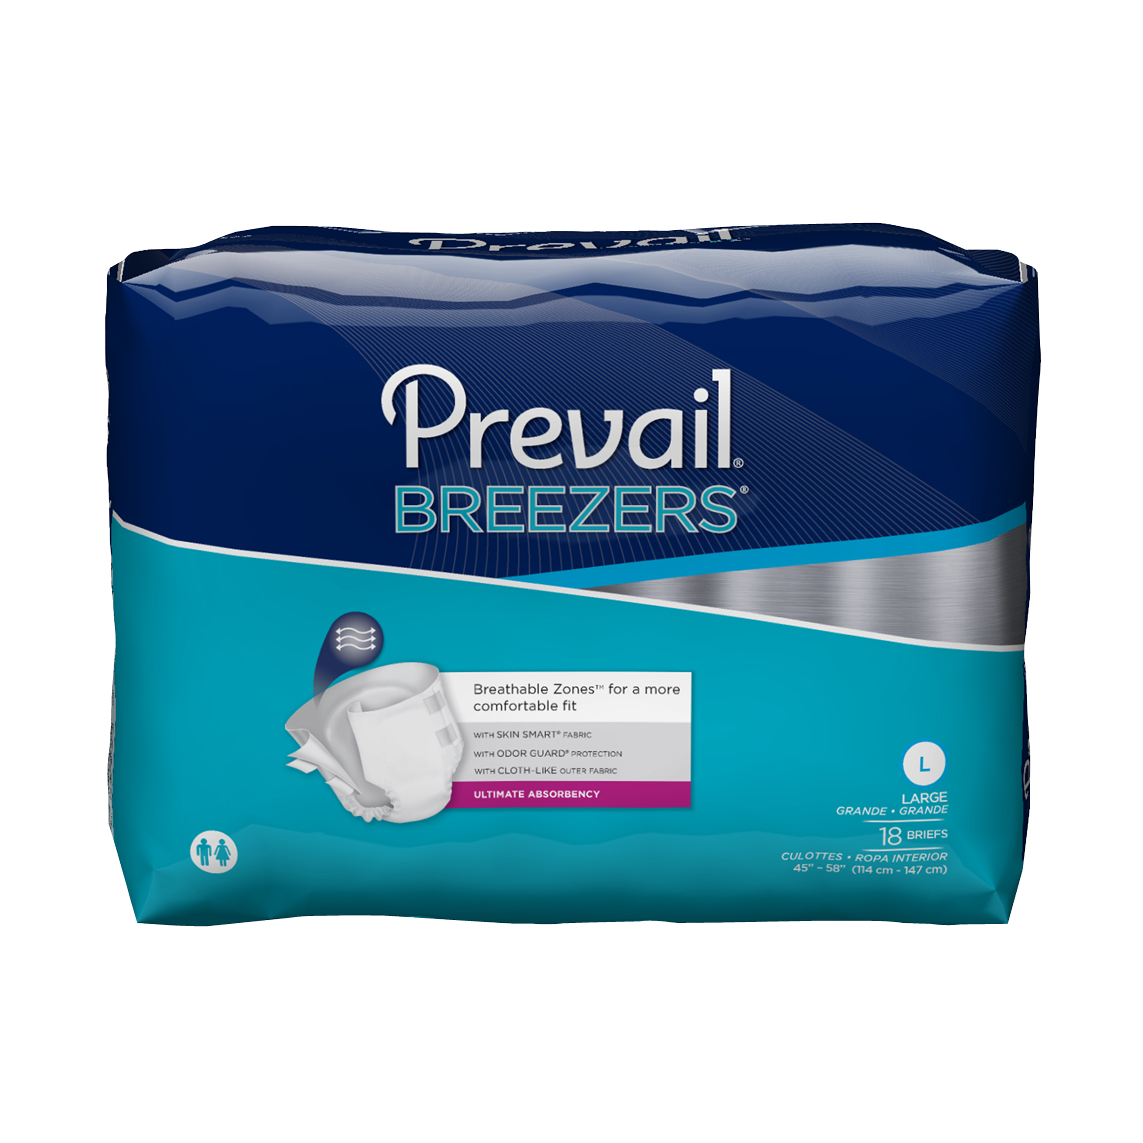 Prevail® Daily Underwear Unisex Disposable Pull On - Moderate